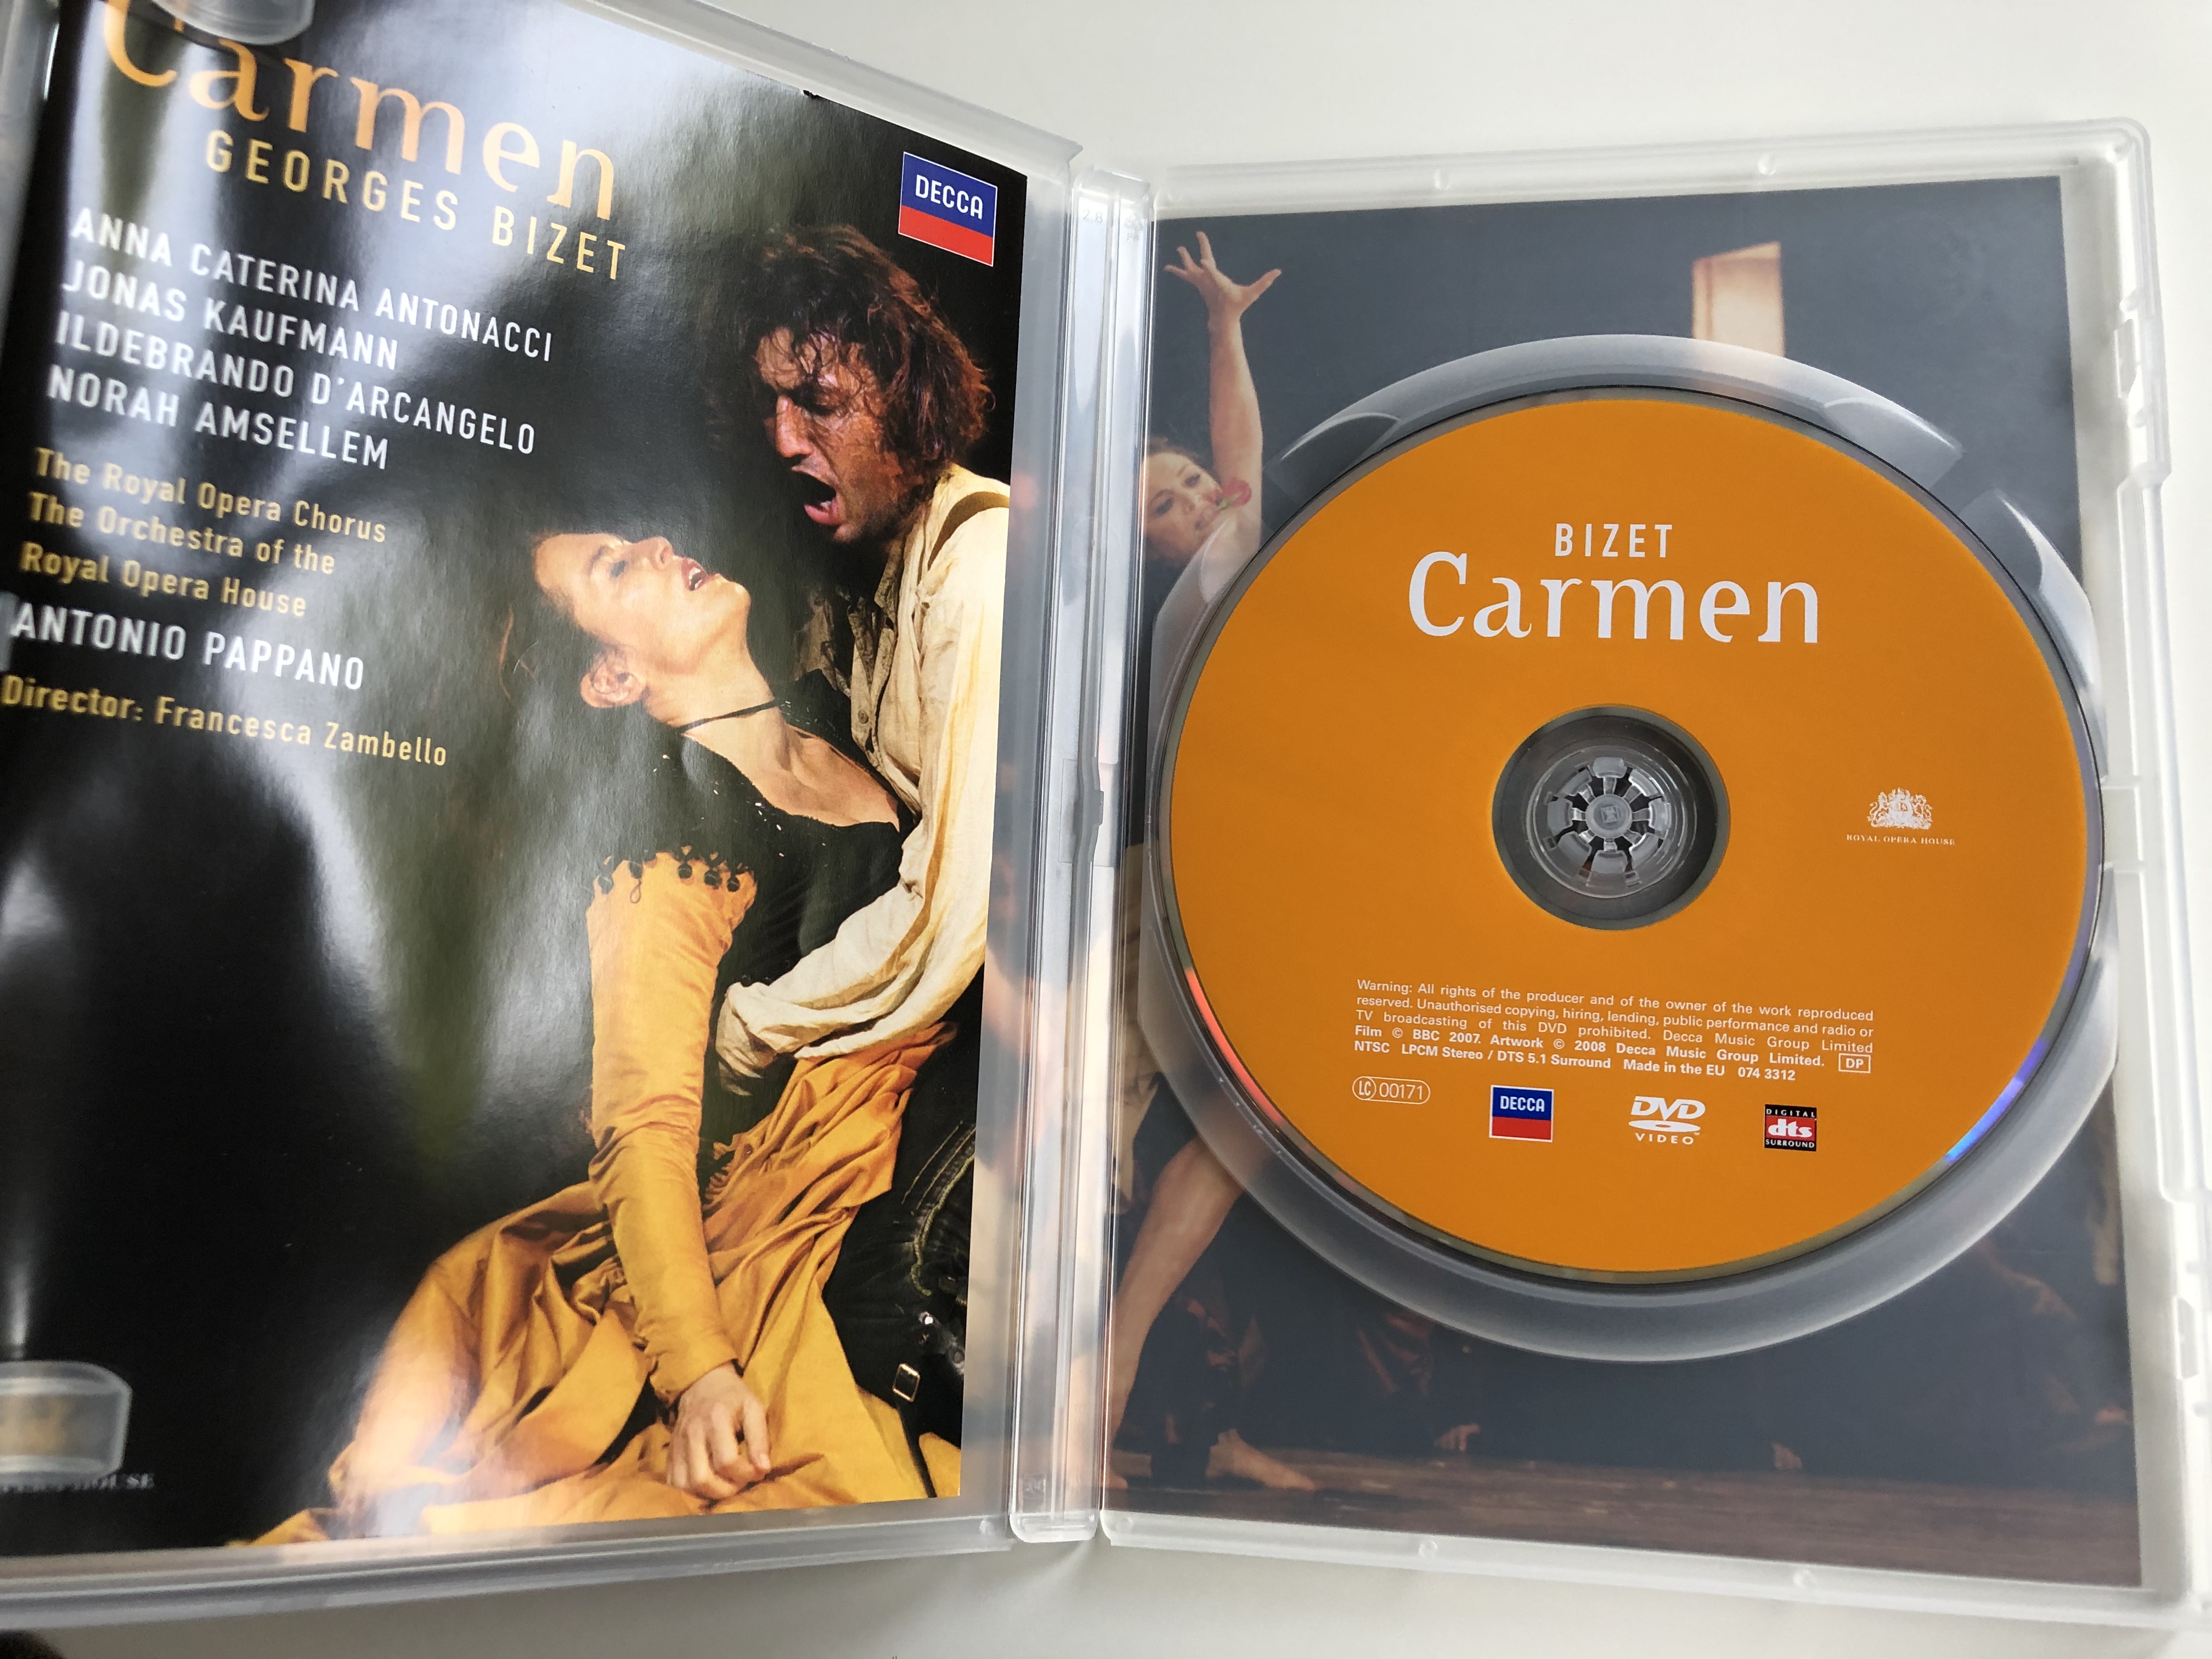 georges-bizet-carmen-dvd-2007-royal-opera-house-directed-by-jonathan-haswell-2.jpg